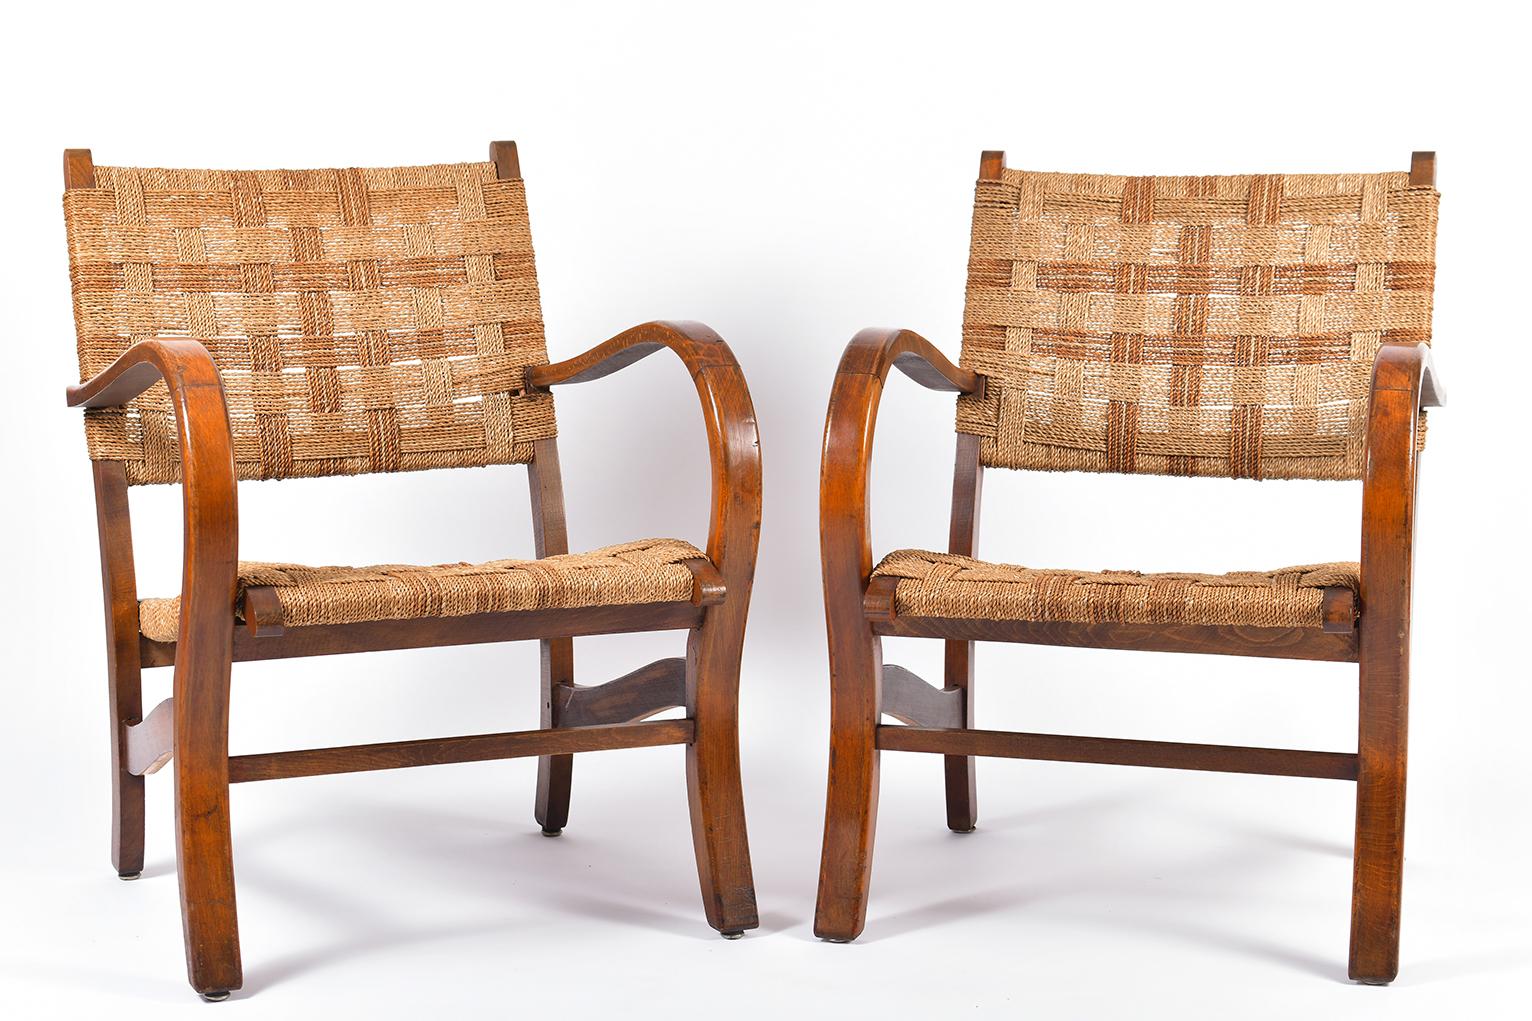 A pair of beechwood and two-tone woven sea grass rope armchairs, by Erich Dieckmann (1896-1944)
circa 1925-1930


Erich Dieckmann was one of the most important Bauhaus furniture designers. From 1918 until 1920 Erich Dieckmann studied